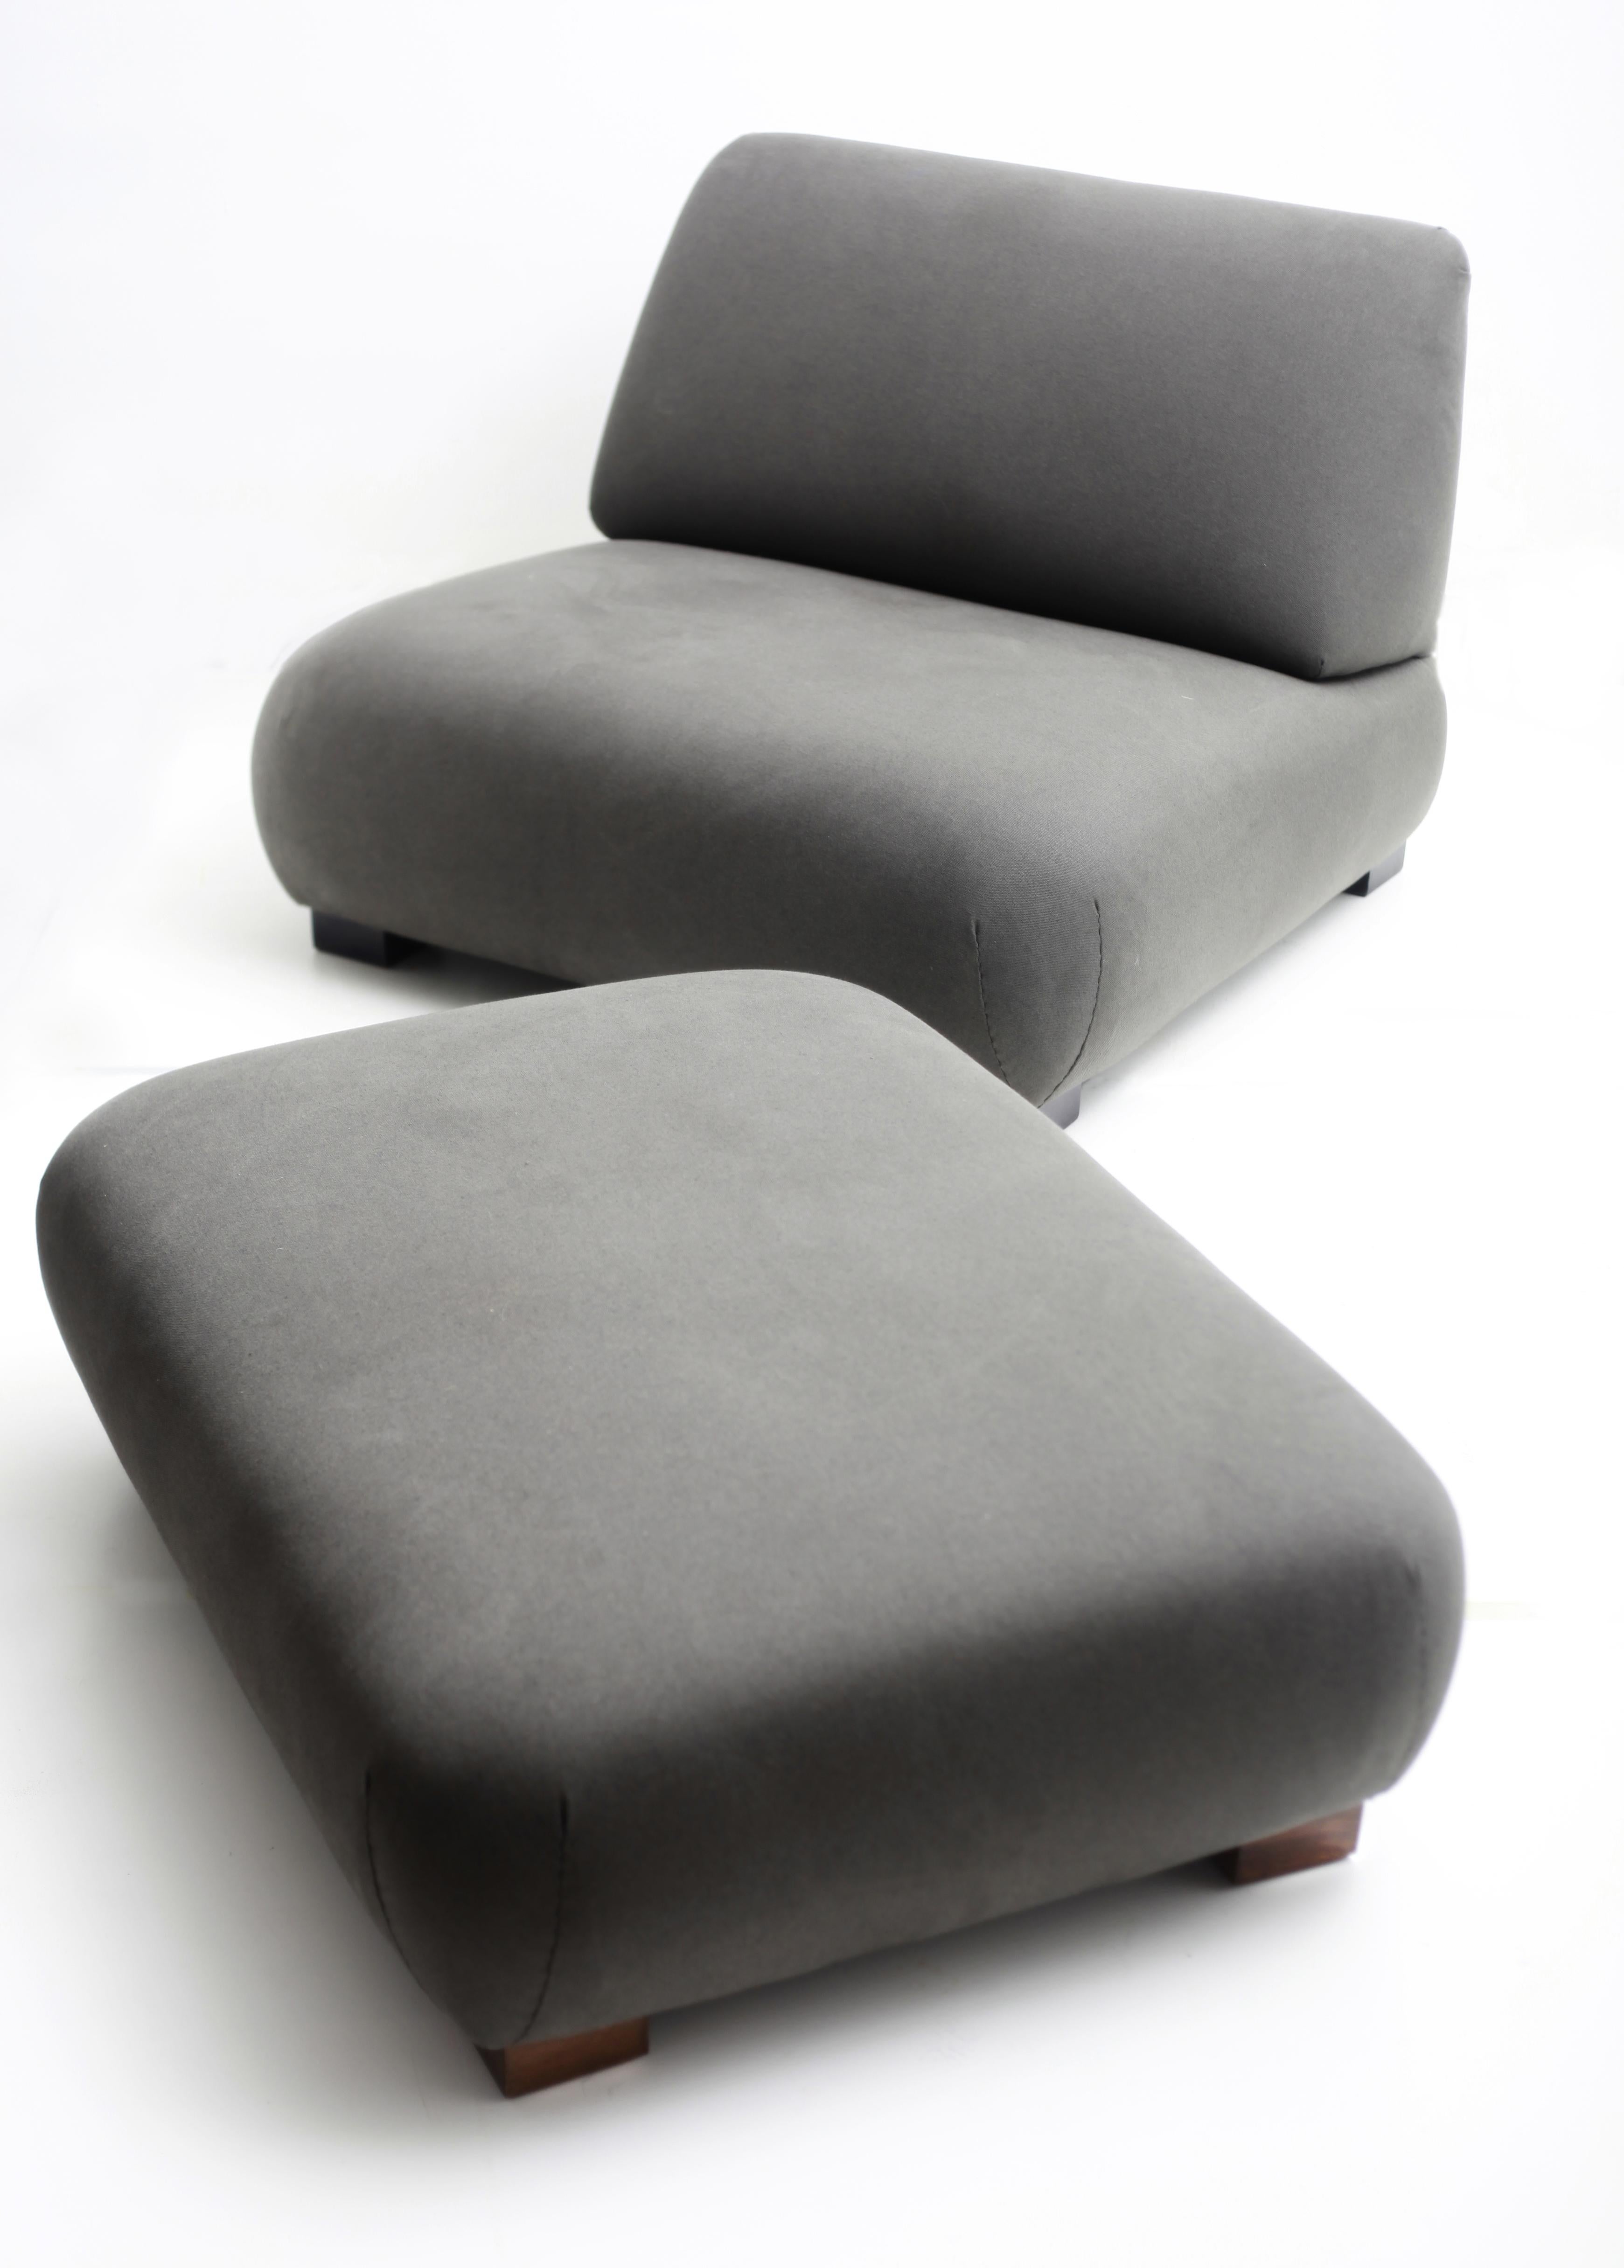 Set of 2 Cadaqué lounge chair and ottoman by Federico Correa, Alfonso Milá
Dimensions: D 100 x W 100 x H 75 cm / D 75 x W 100 x H 34 cm.
Materials: beech wood, fabric.
Available in other fabrics.

The Cadaqués ensemble sums up an entire philosophy